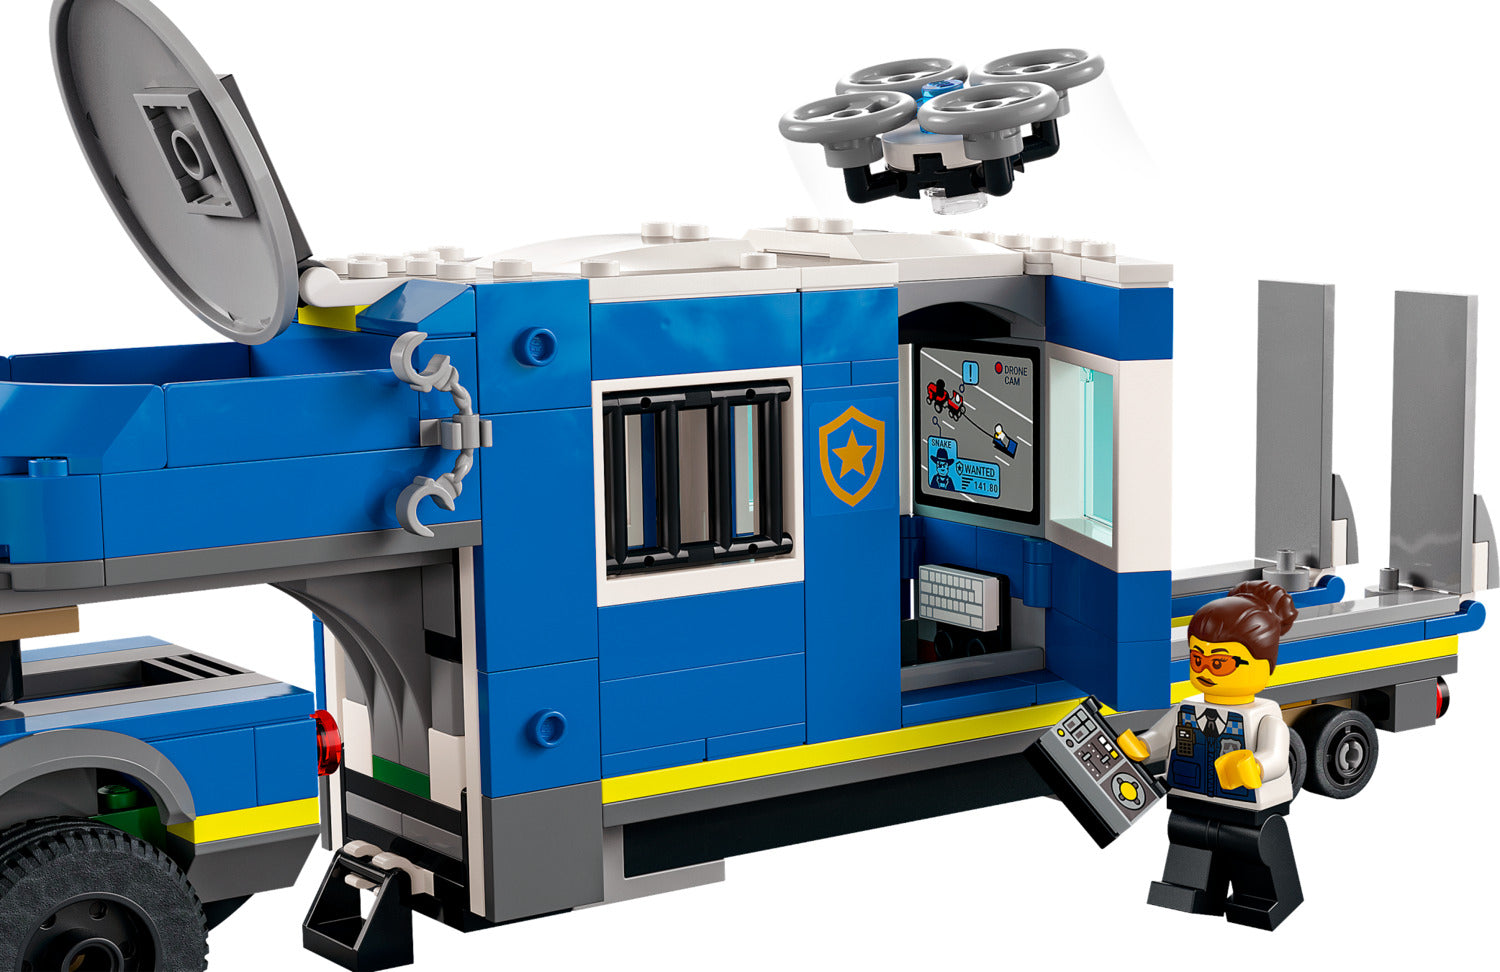 LEGO® City: Police Mobile Command Truck